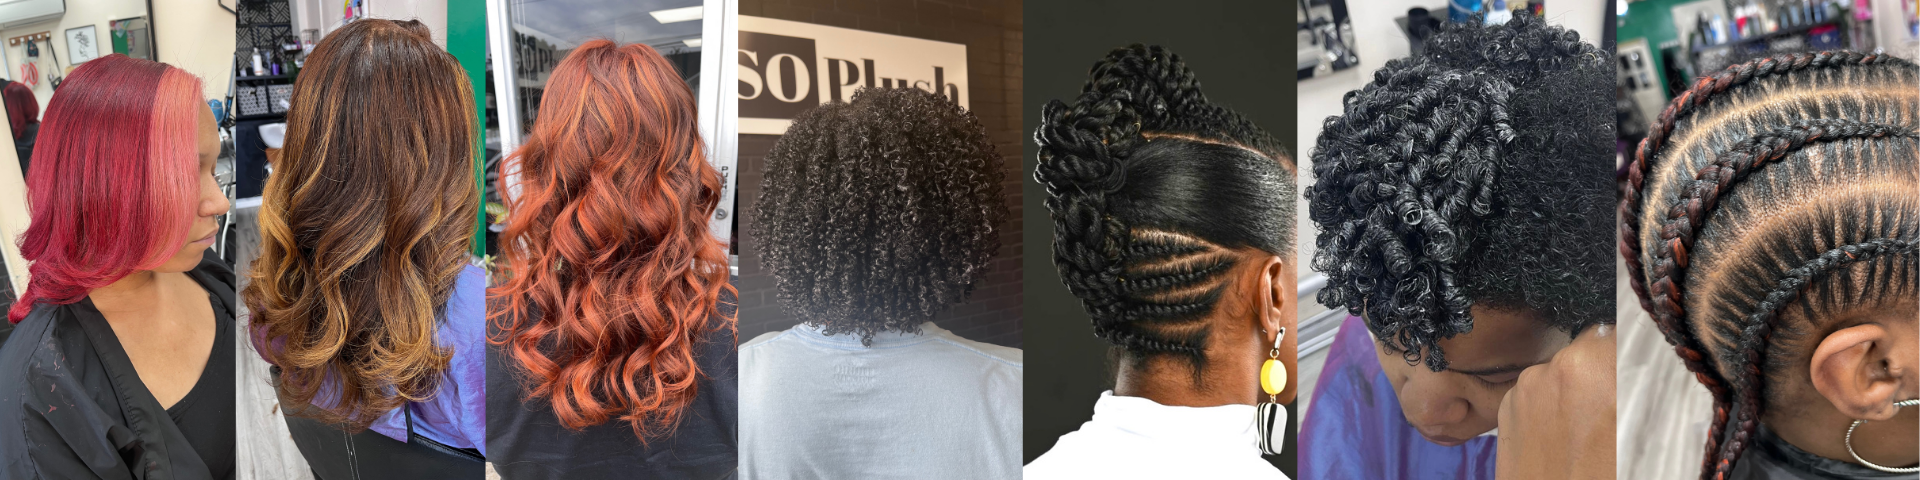 Banner collage featuring the most recent hairstyles and hair services provided by Cherice Wedderburn, showcasing photos of her latest work at Solplush Unisex Hair Salon.